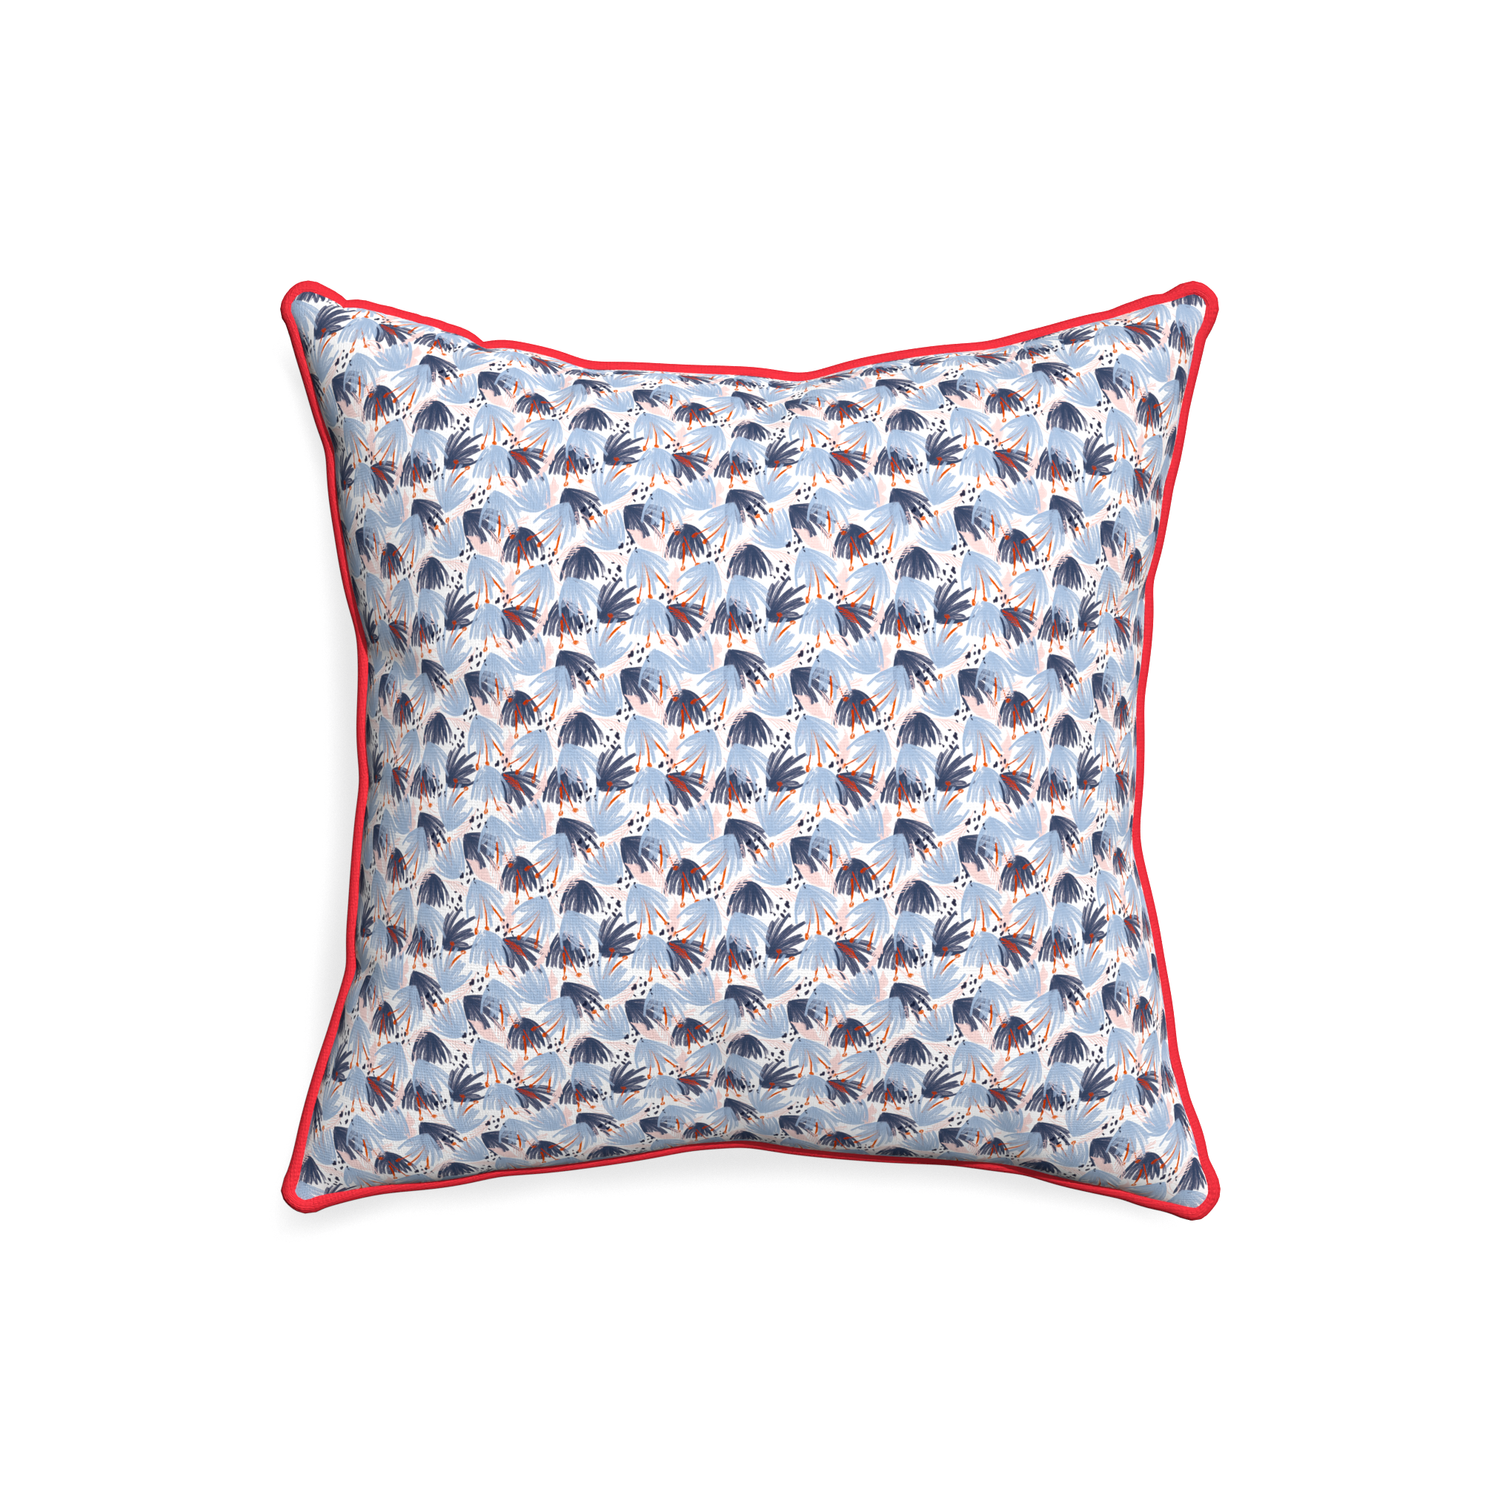 20-square eden blue custom pillow with cherry piping on white background